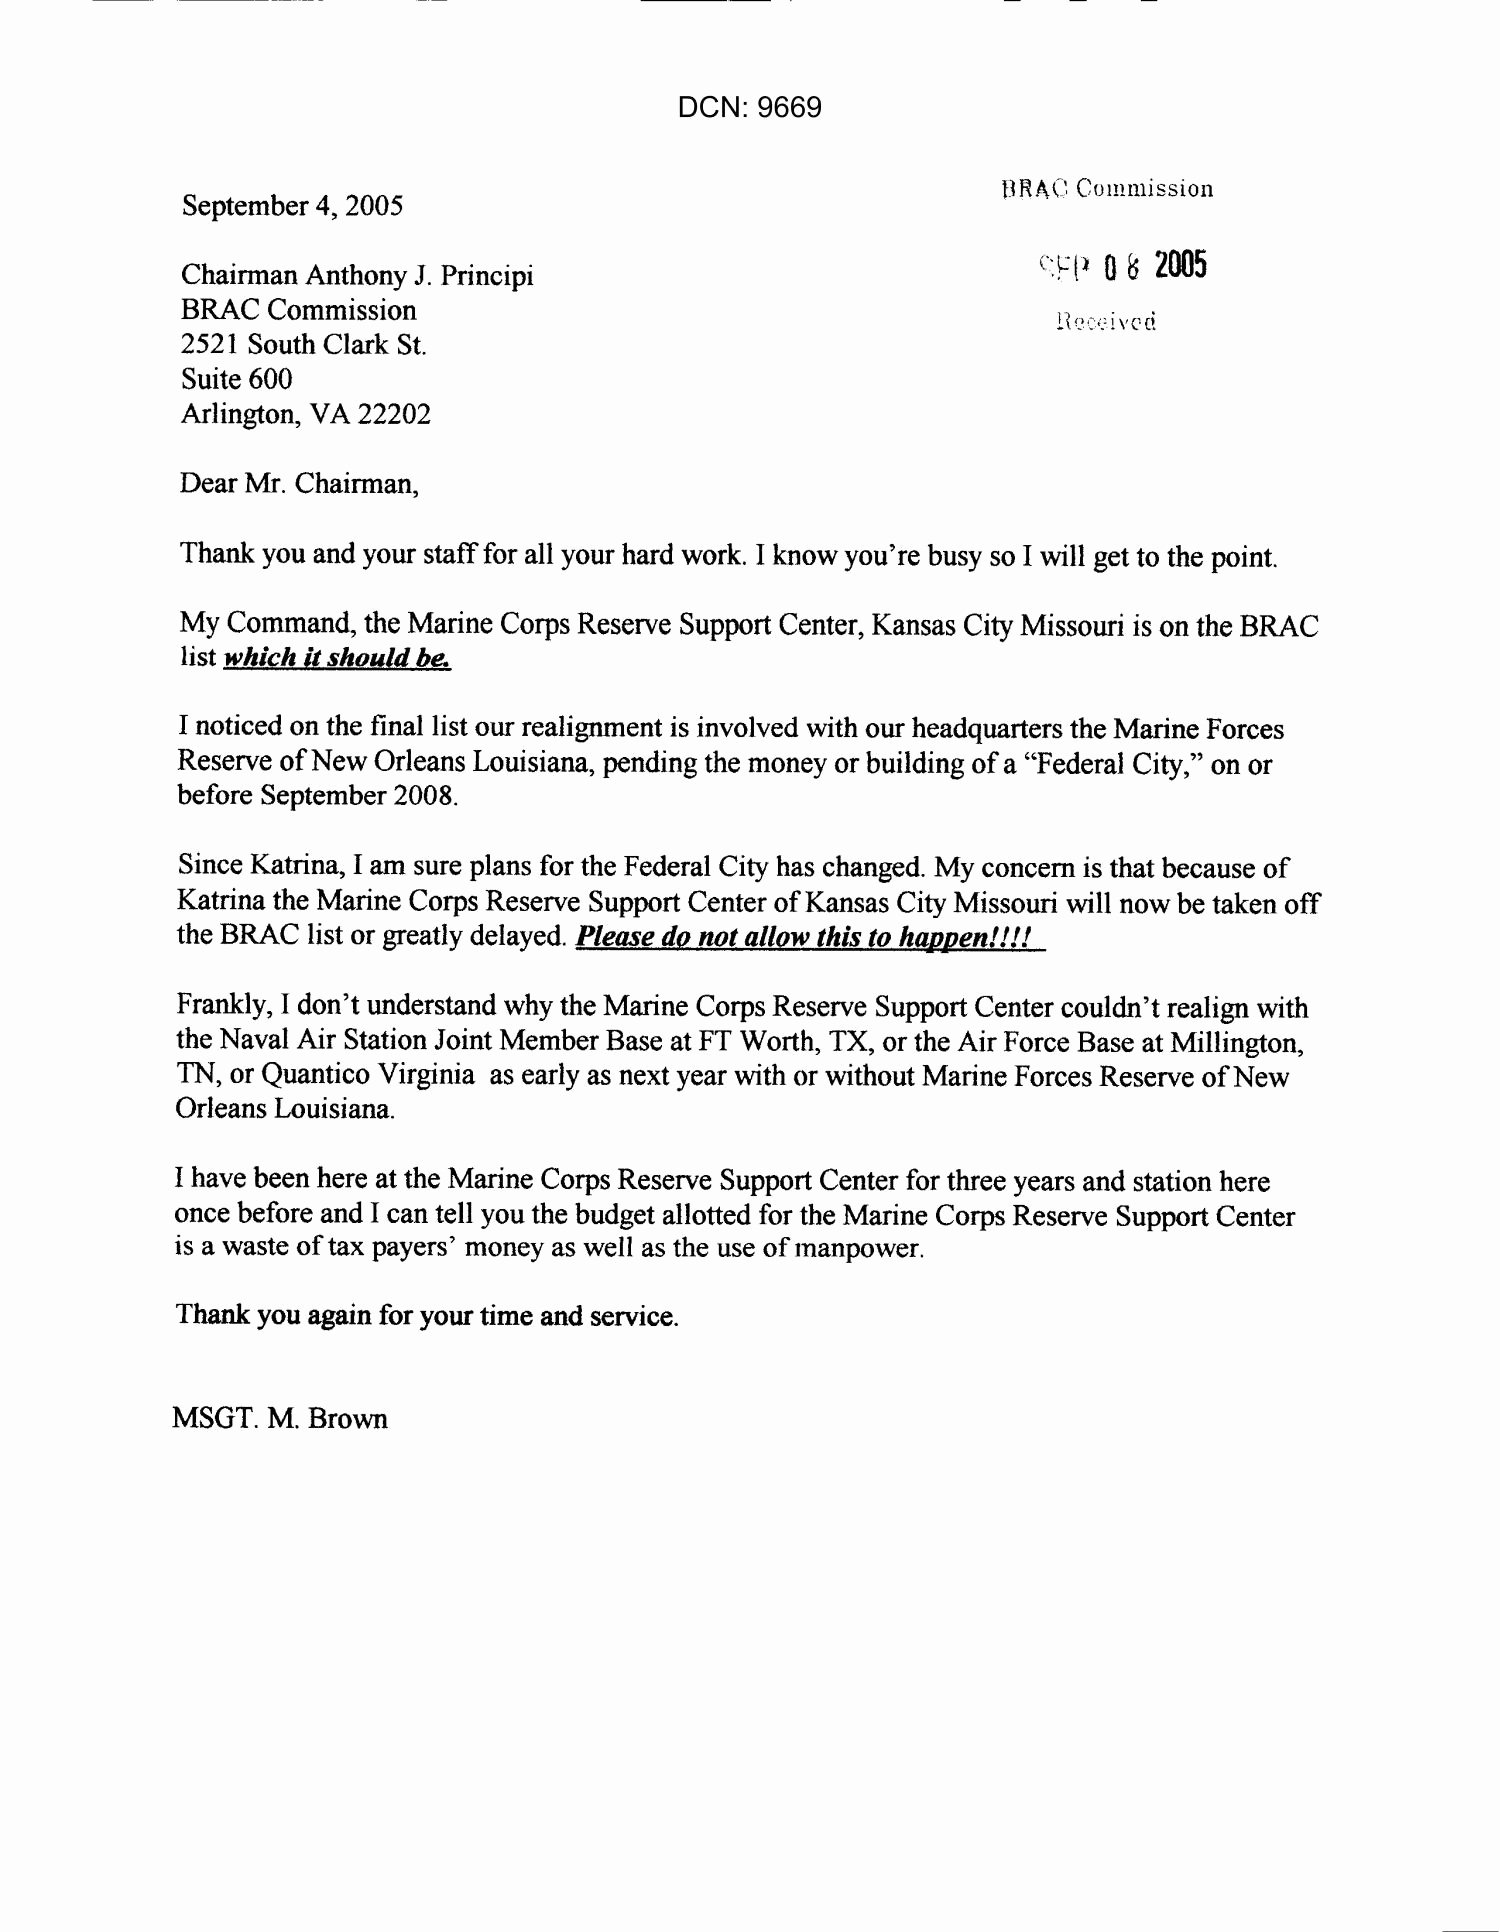 Usmc Letter Of Recommendation Unique Letter From Msgt M Brouwn Of Marine Corps Reserve